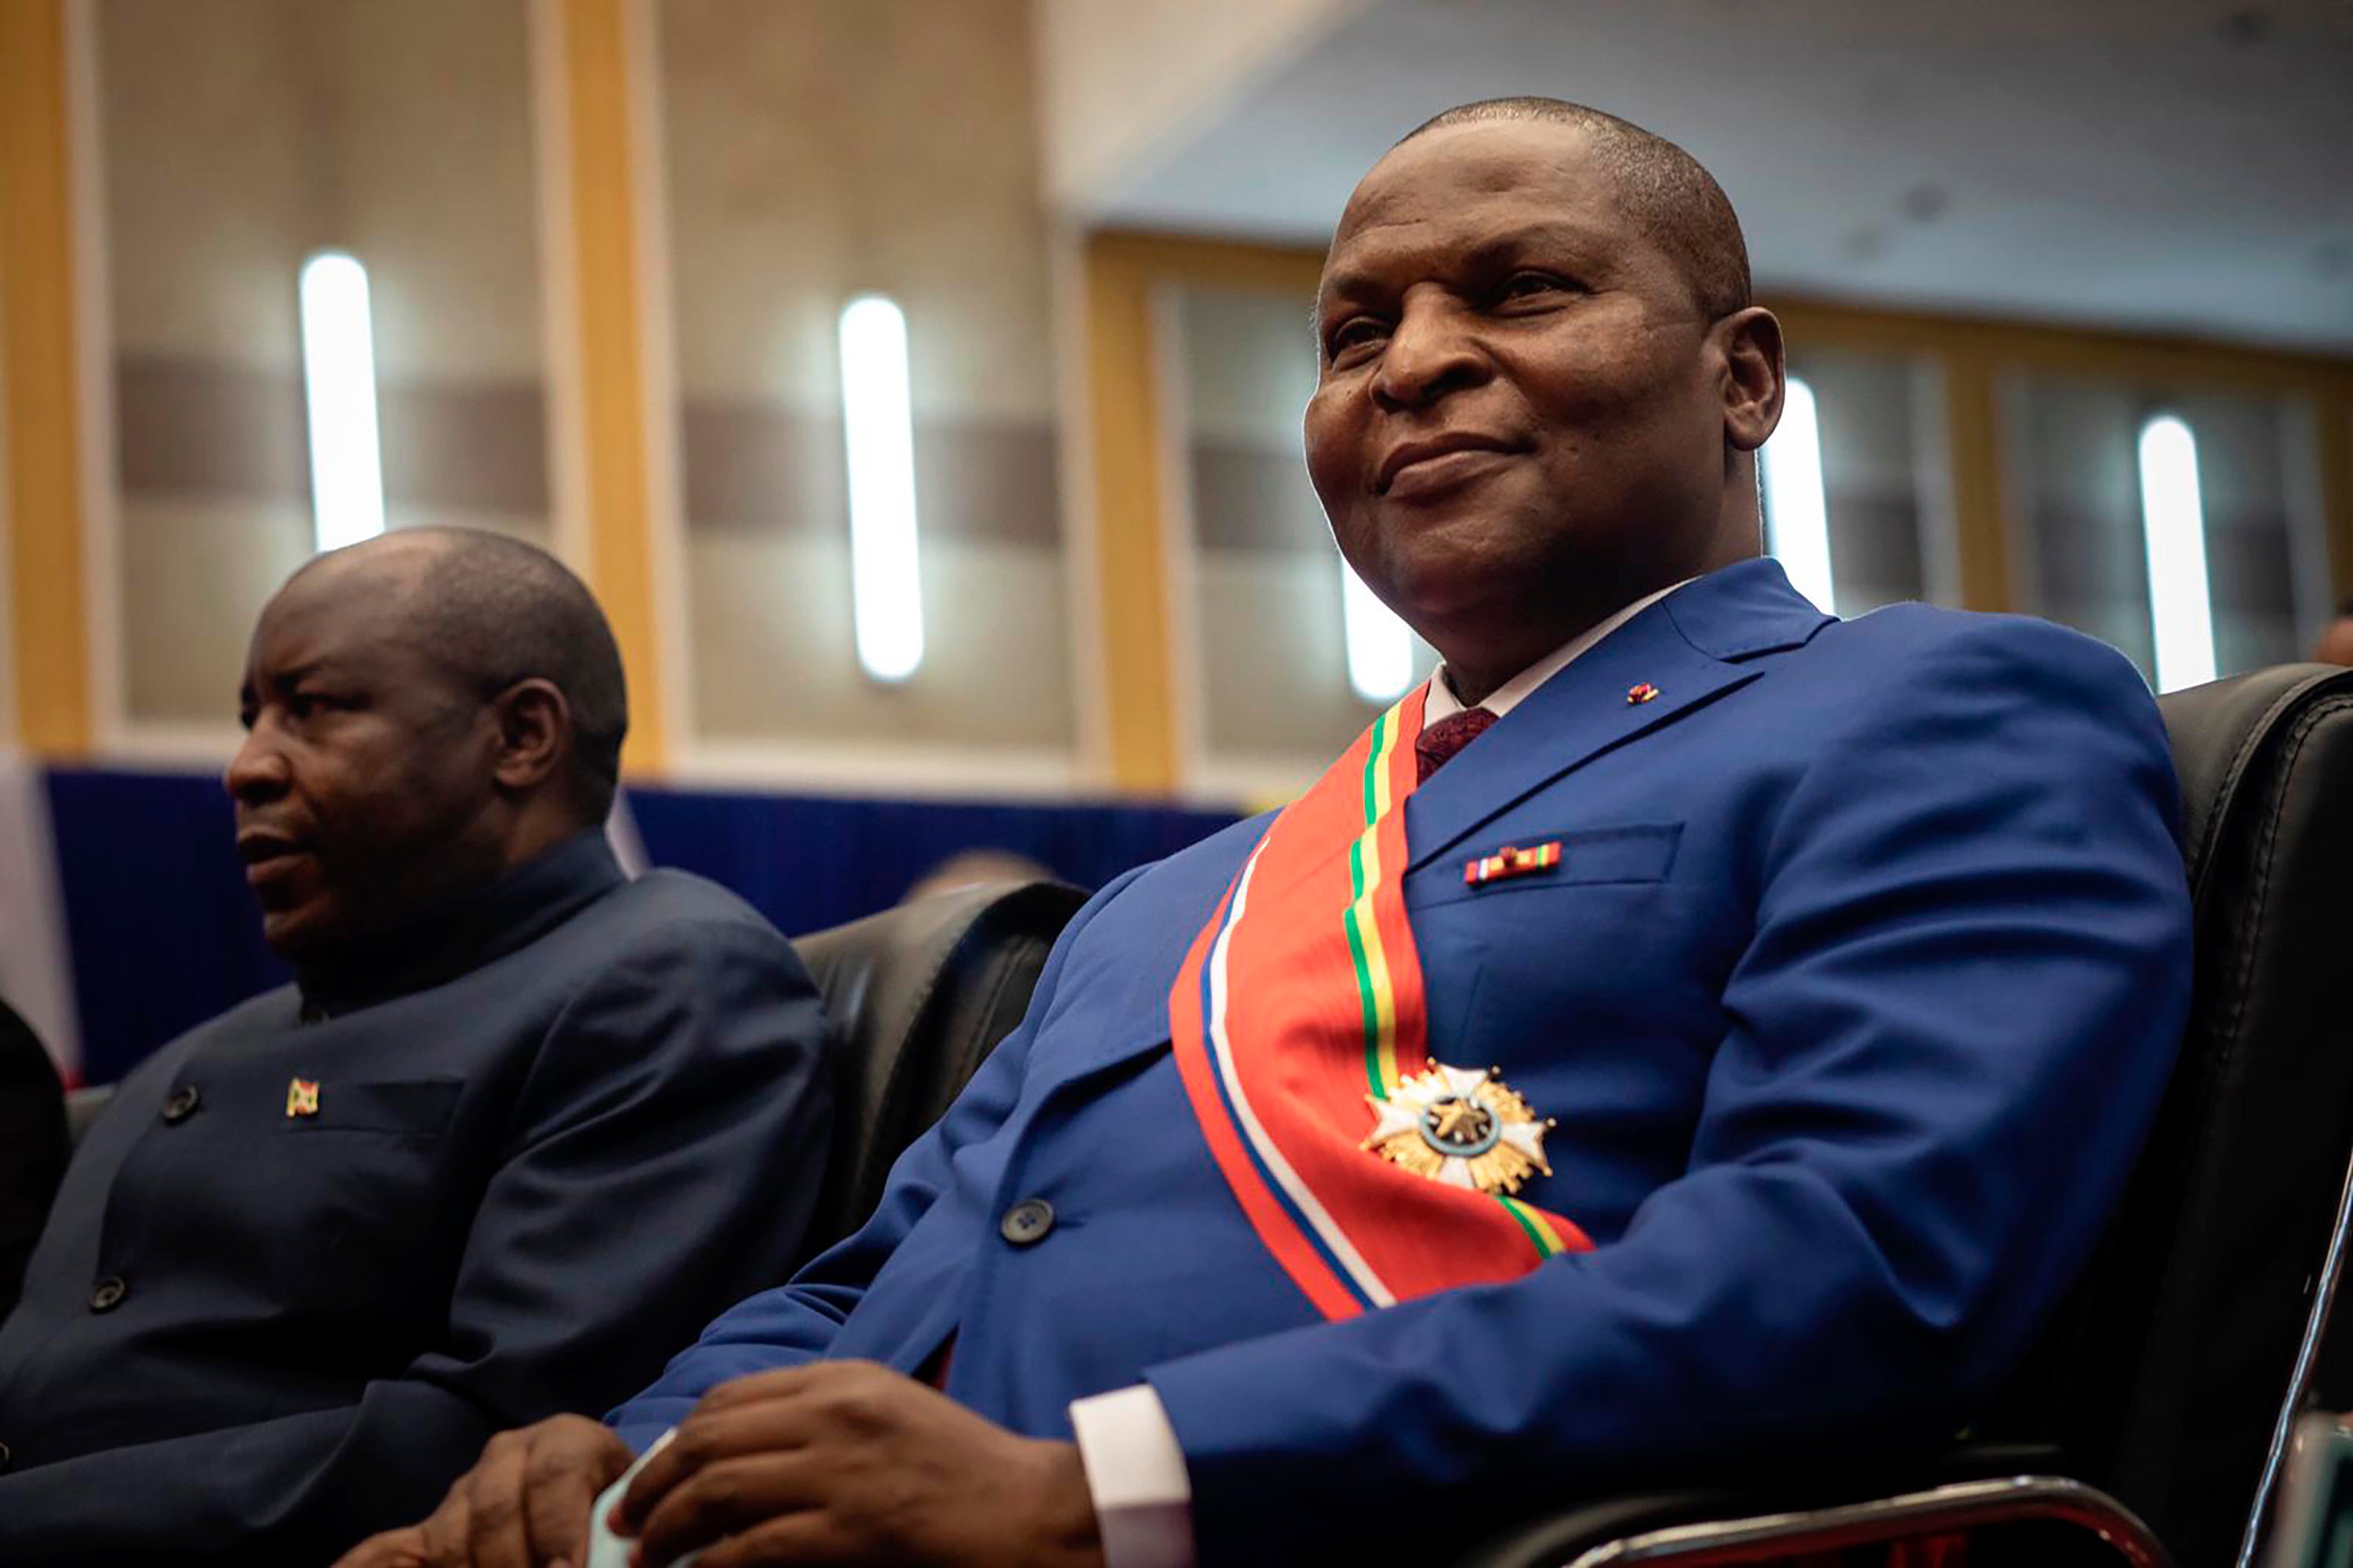 The current fighting between a coalition of militias and the national army was sparked by a Constitutional Court decision to bar Bozize from running in last year’s presidential election, in which President Faustin-Archange Touadera (pictured here) won a second term